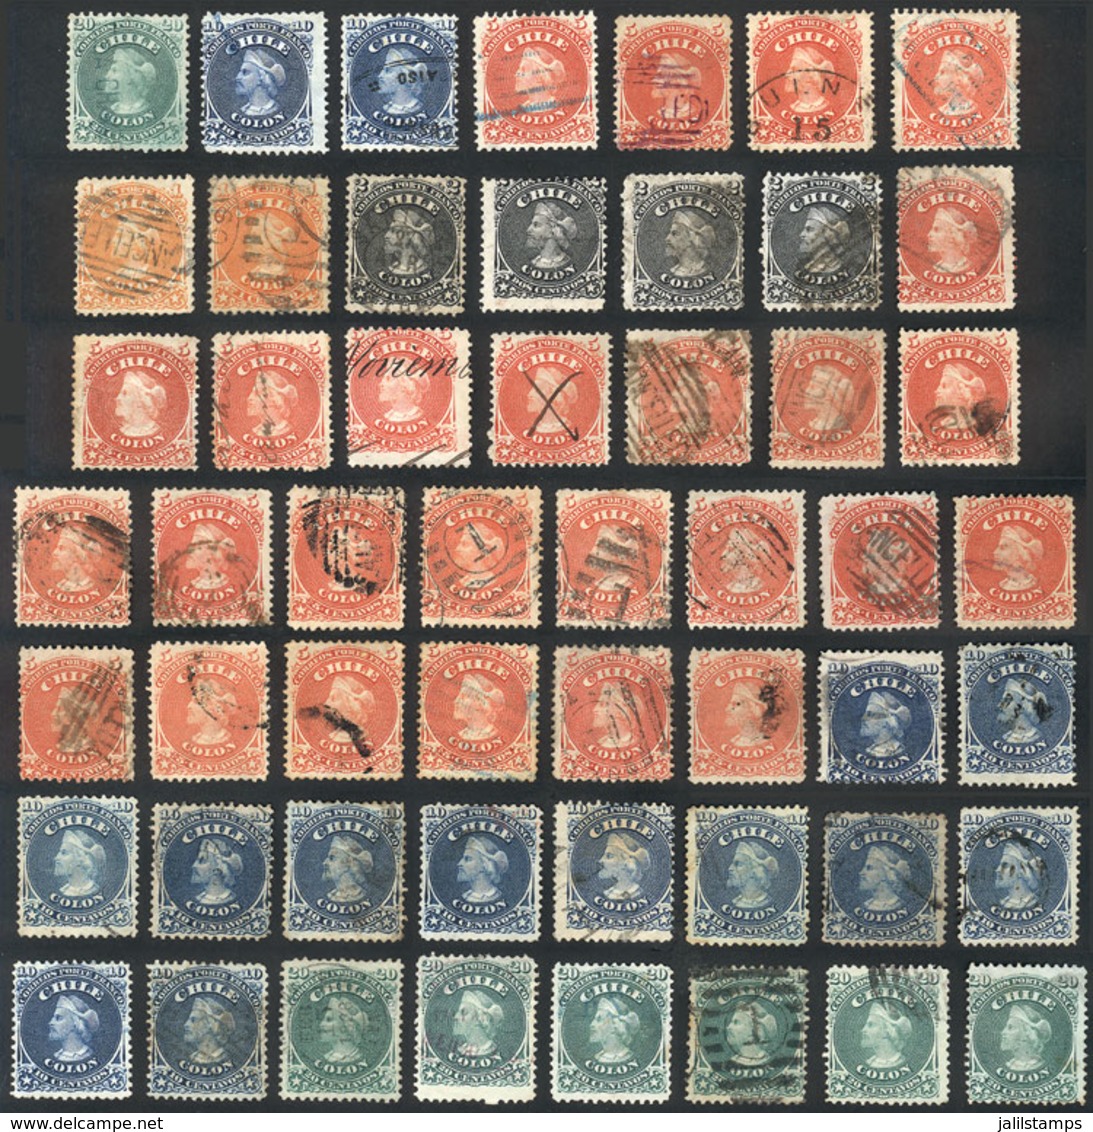 CHILE: Lot Of Stamps Issued In 1867/8, All With Interesting Cancels, Some Rare. Very Fine Quality, Very Interesting For  - Chile